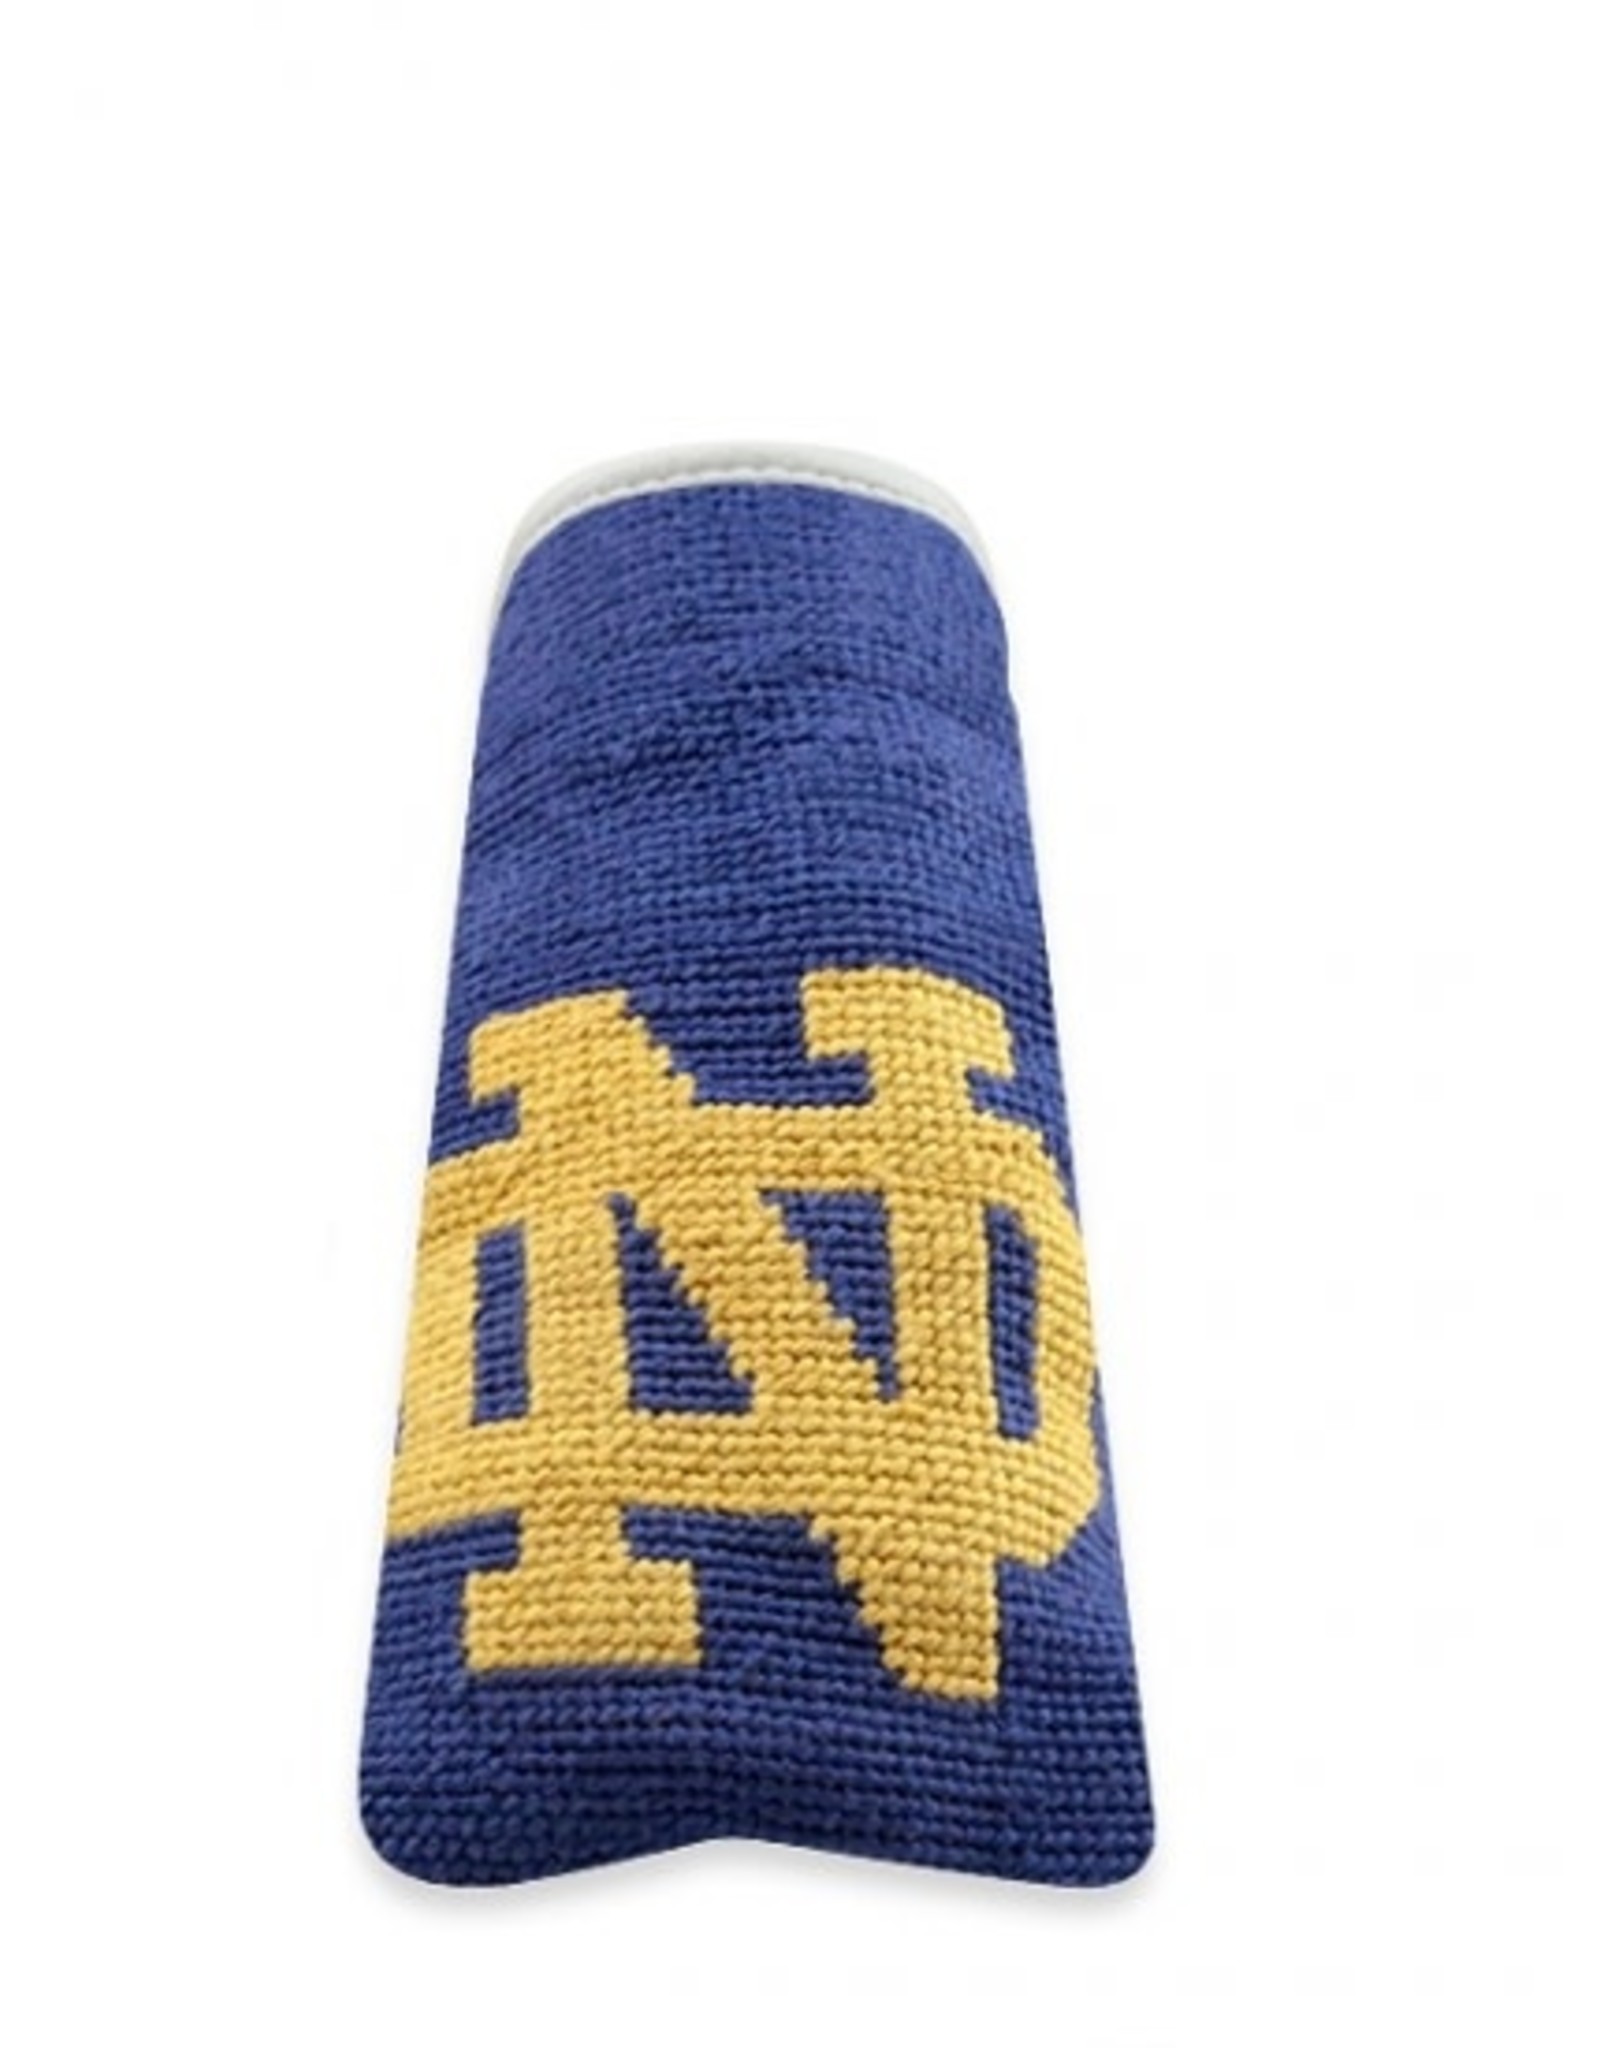 Putter Cover Notre Dame - The Initial Choice